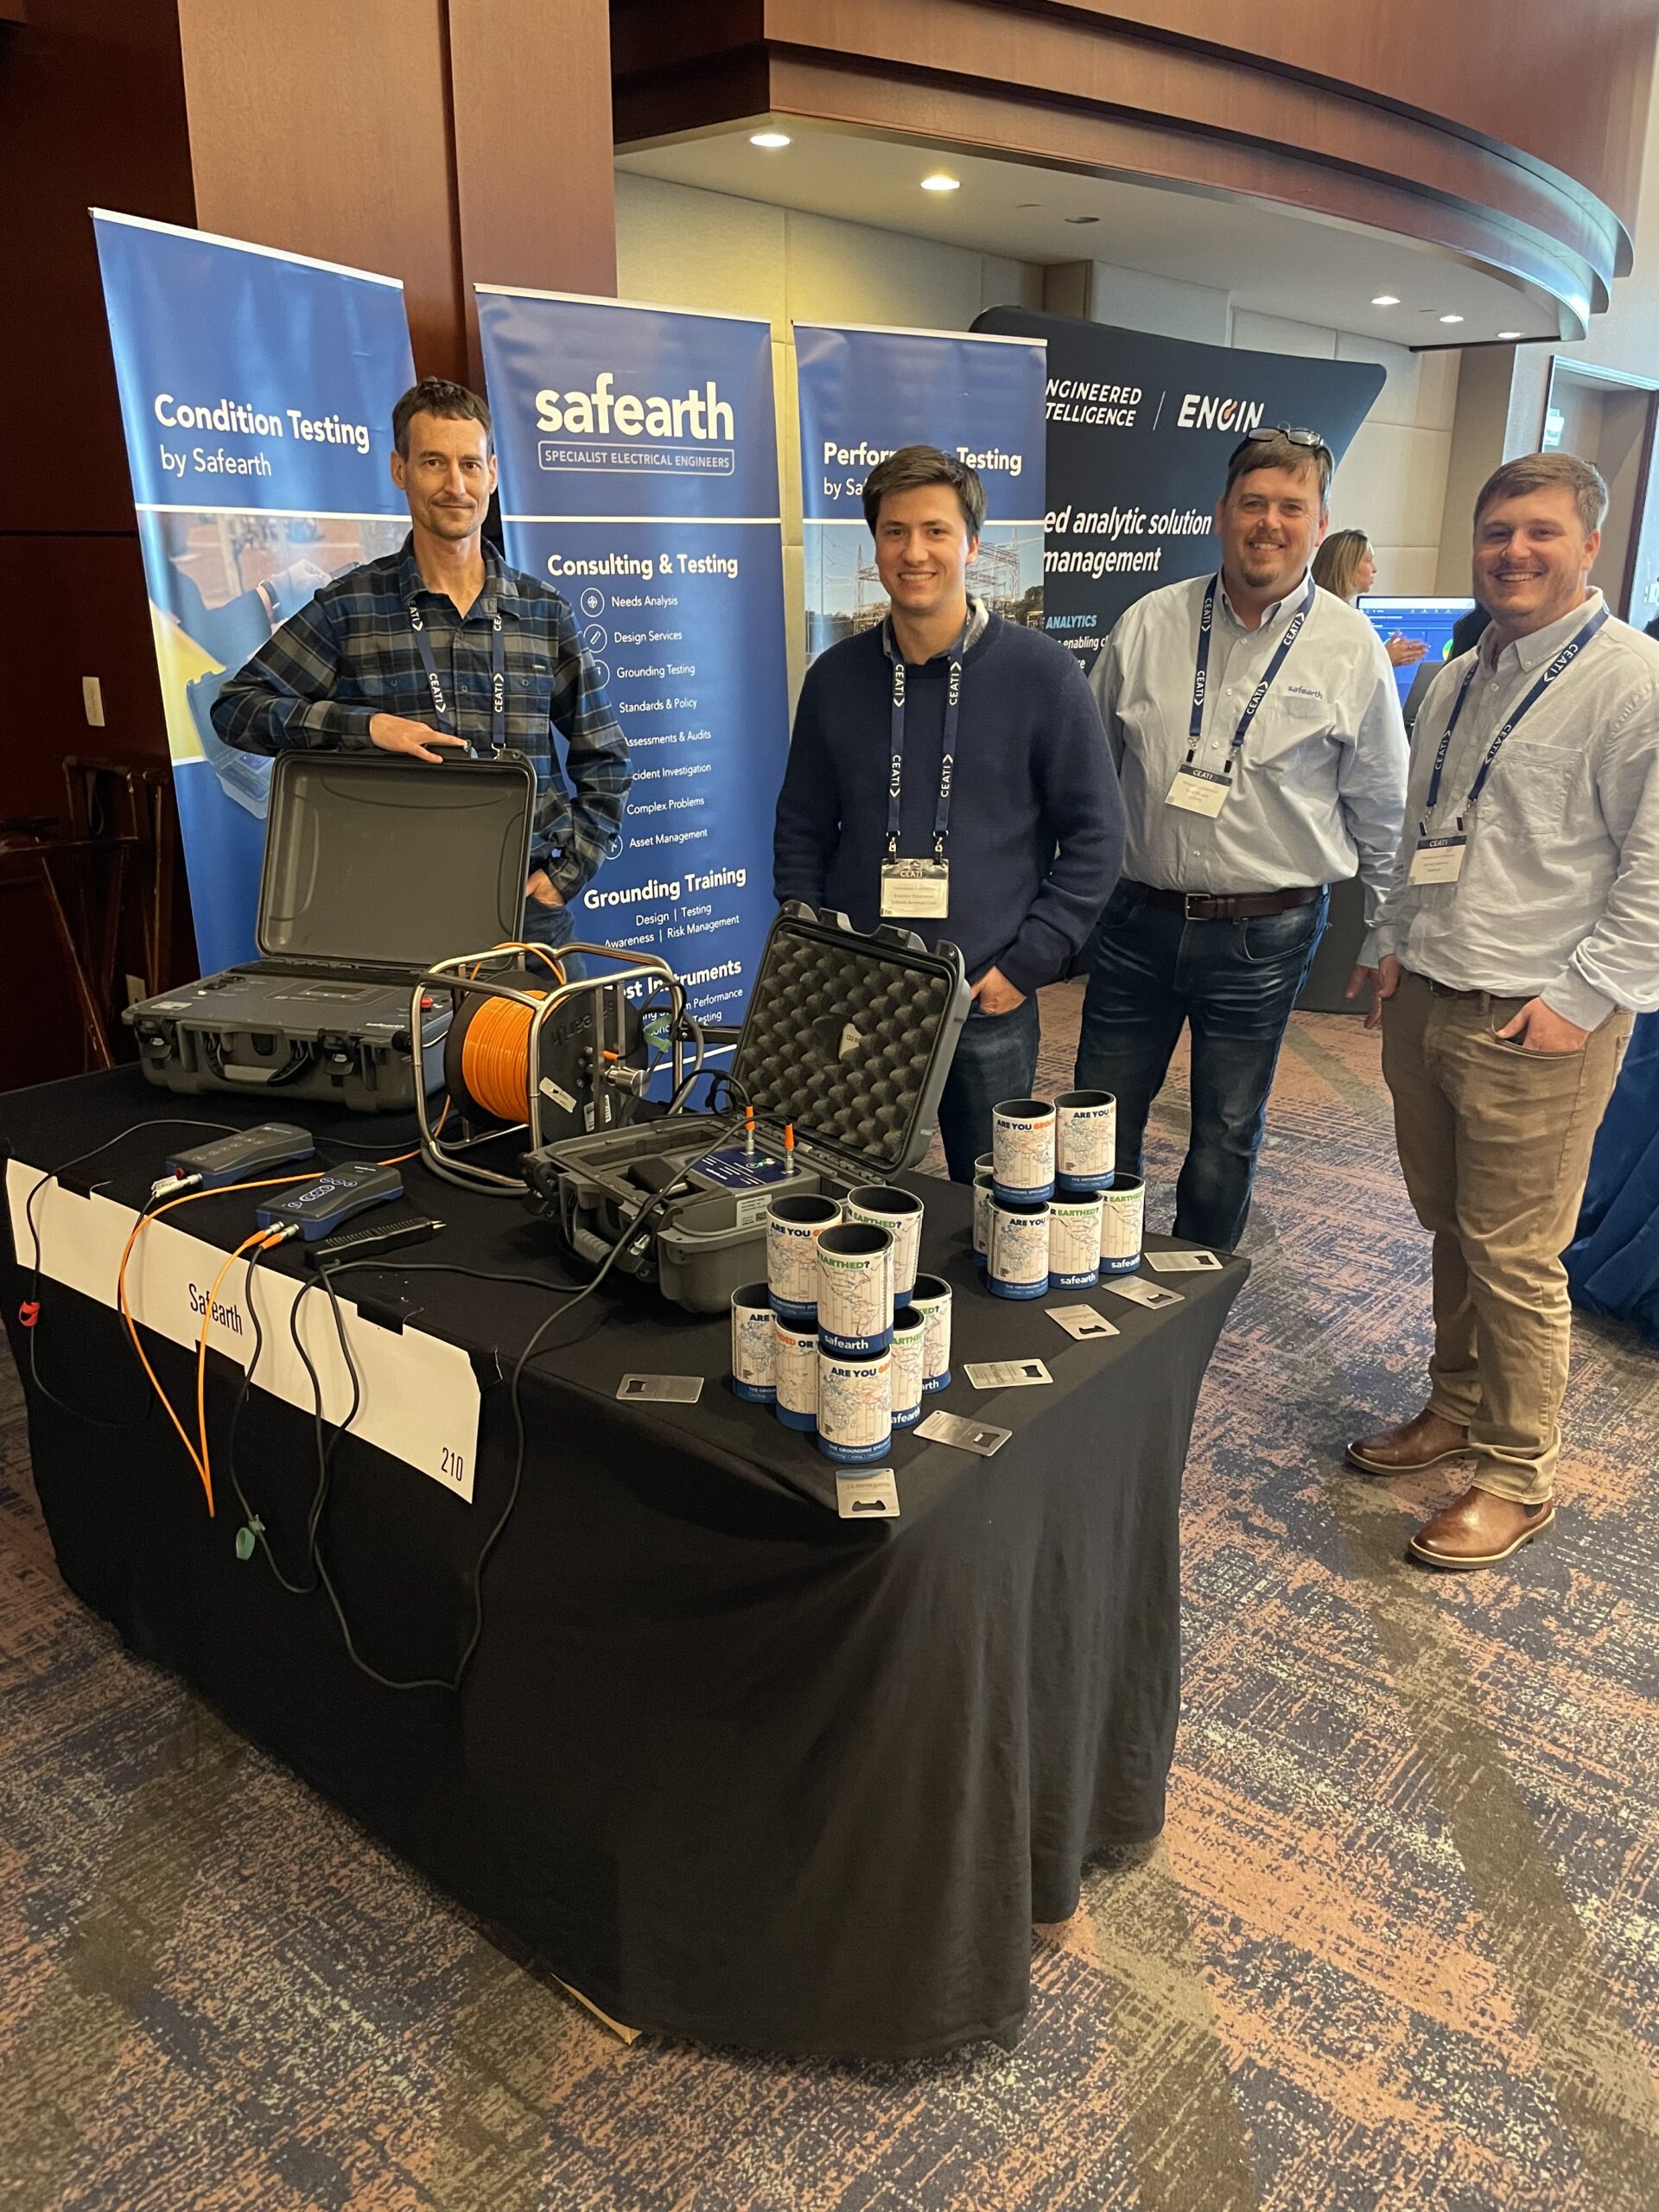 Bryan Beske and Brandon Dobrowski from our Wisconsin office caught up with our Alabama team members Keith and Garrett Wallace to attend and exhibit at the CEATI Transmission Conference in Atlanta, Georgia